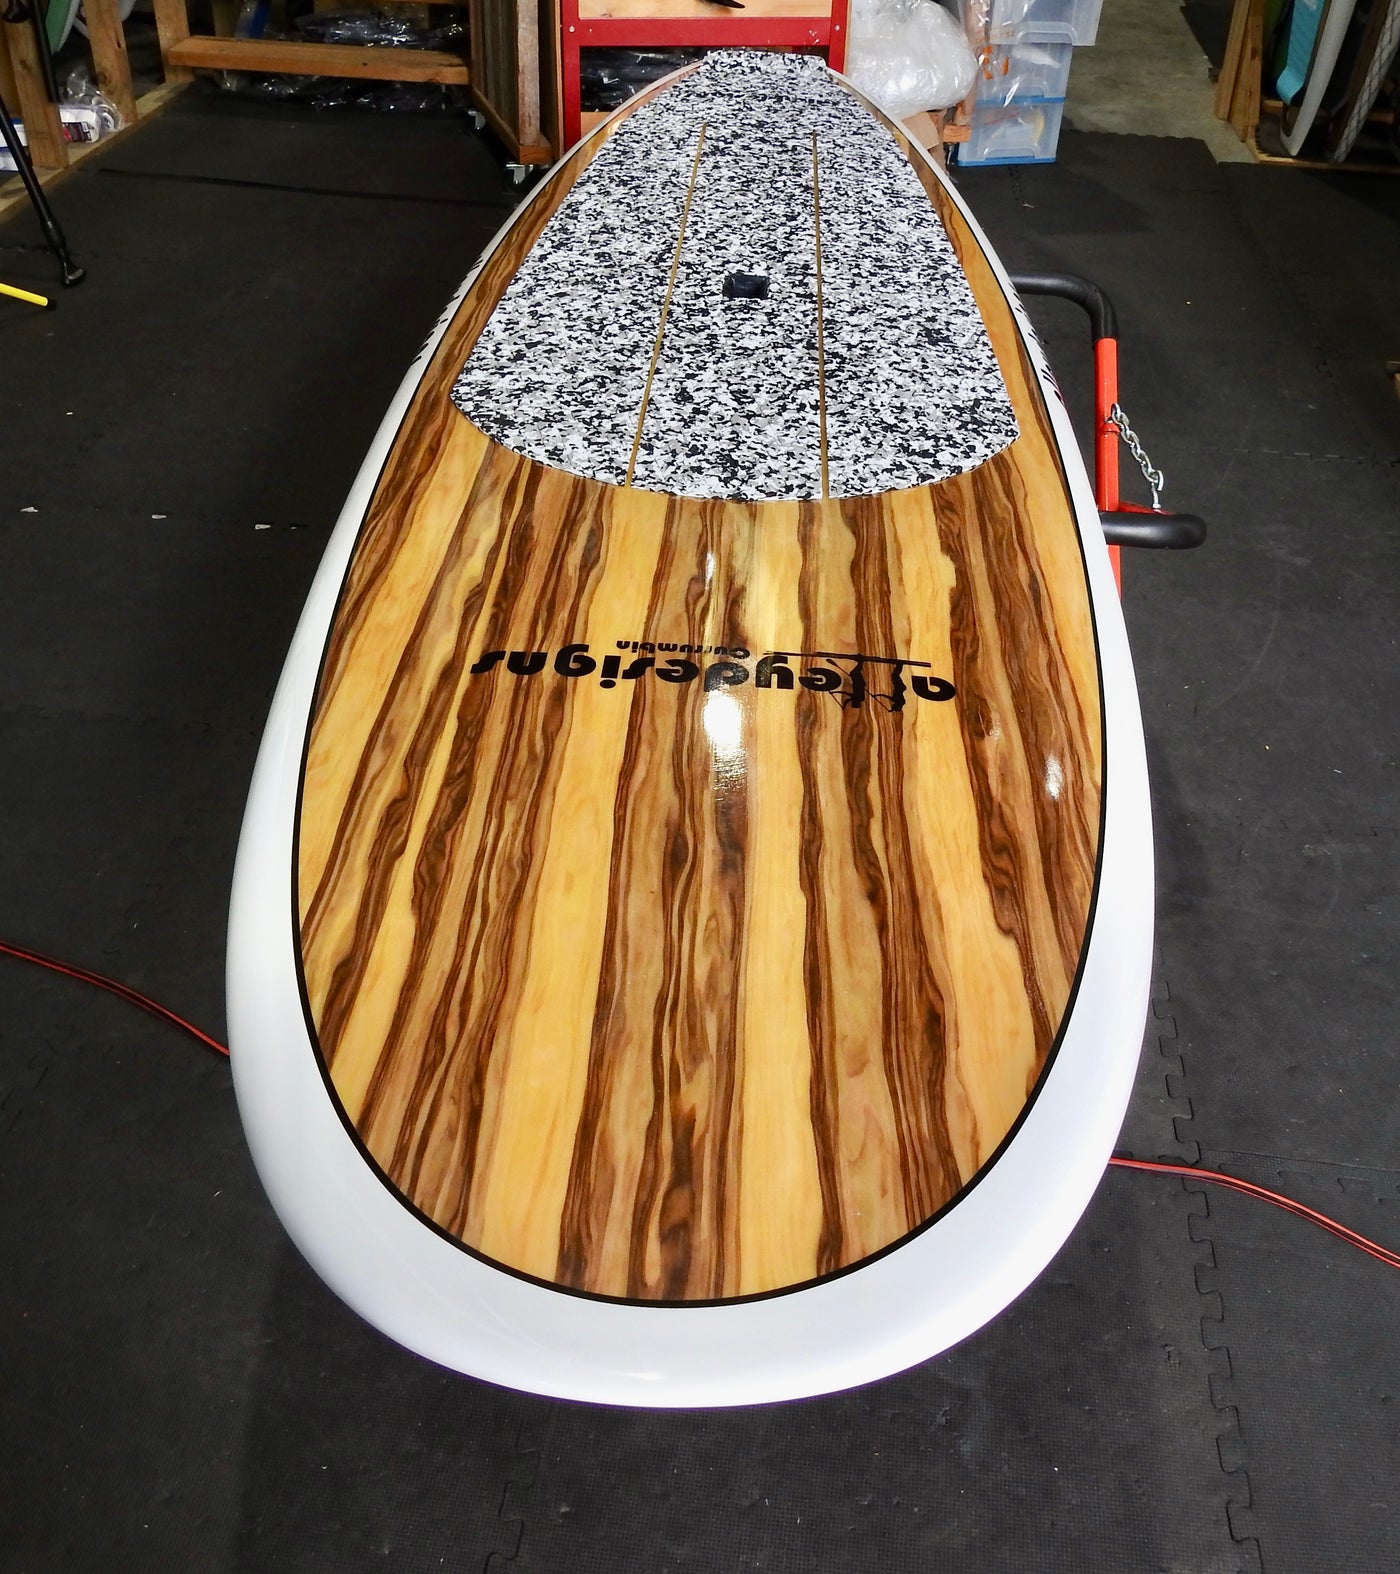 10' x 32" Timber Classic White  Alleydesigns SUP 9/10KG - Alleydesigns  Pty Ltd                                             ABN: 44165571264